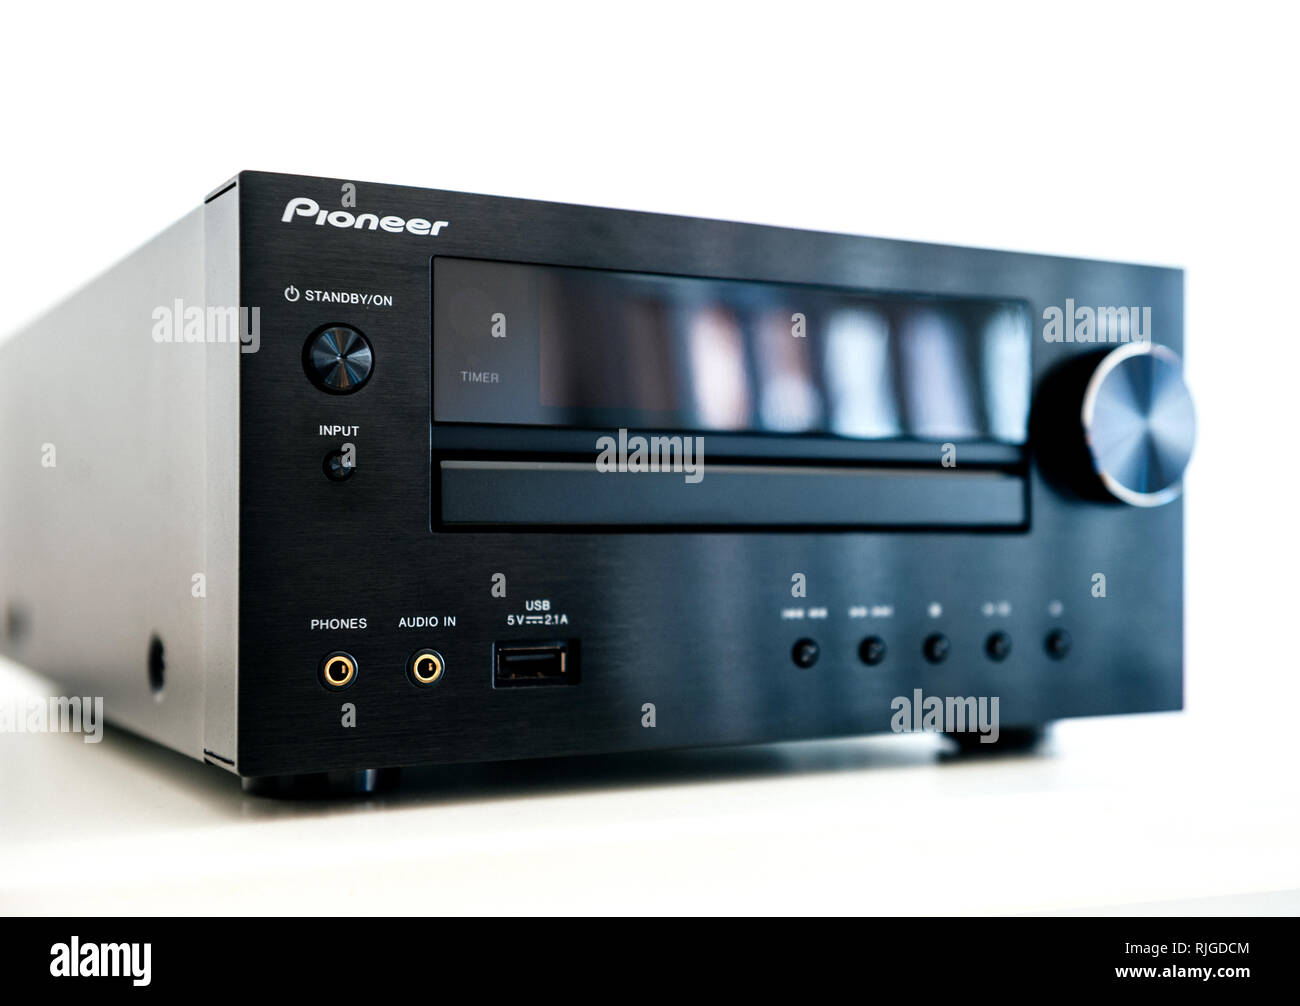 PARIS, FRANCE - FEB 18, 2013: Product hero of Pioneer music amplifier with  CD, tuner and internet radio Stock Photo - Alamy